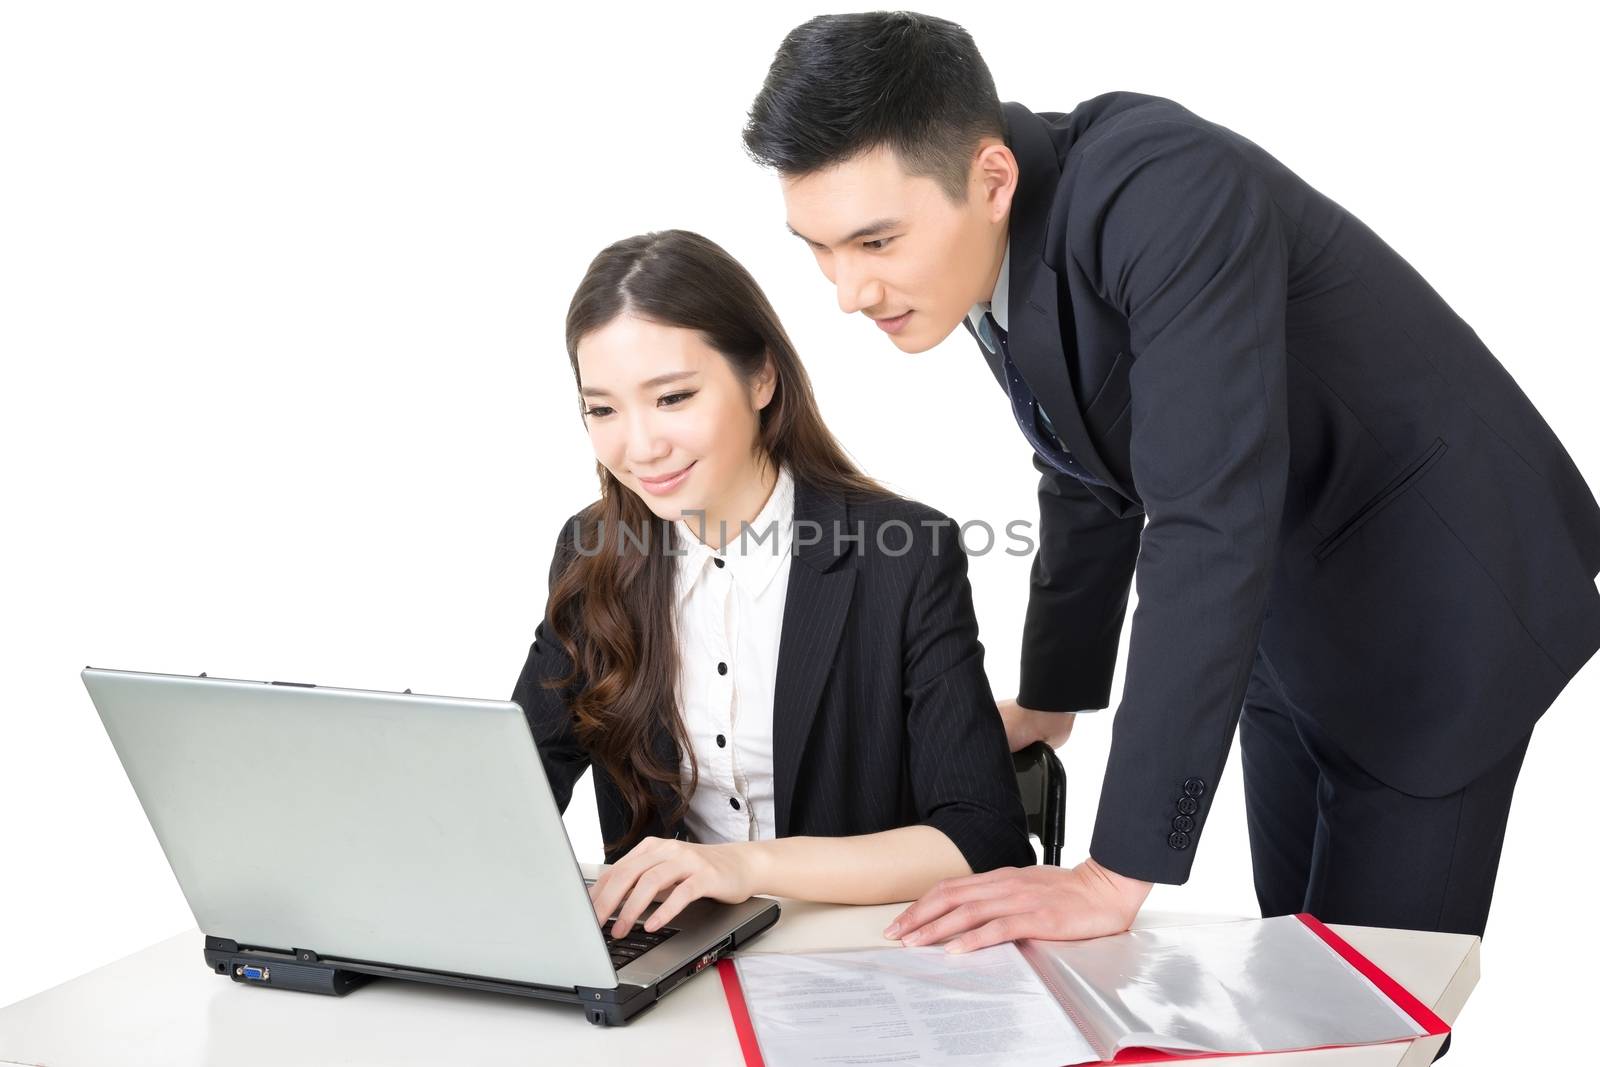 Confident young businessman and businesswoman discussion their work, closeup portrait on white background.